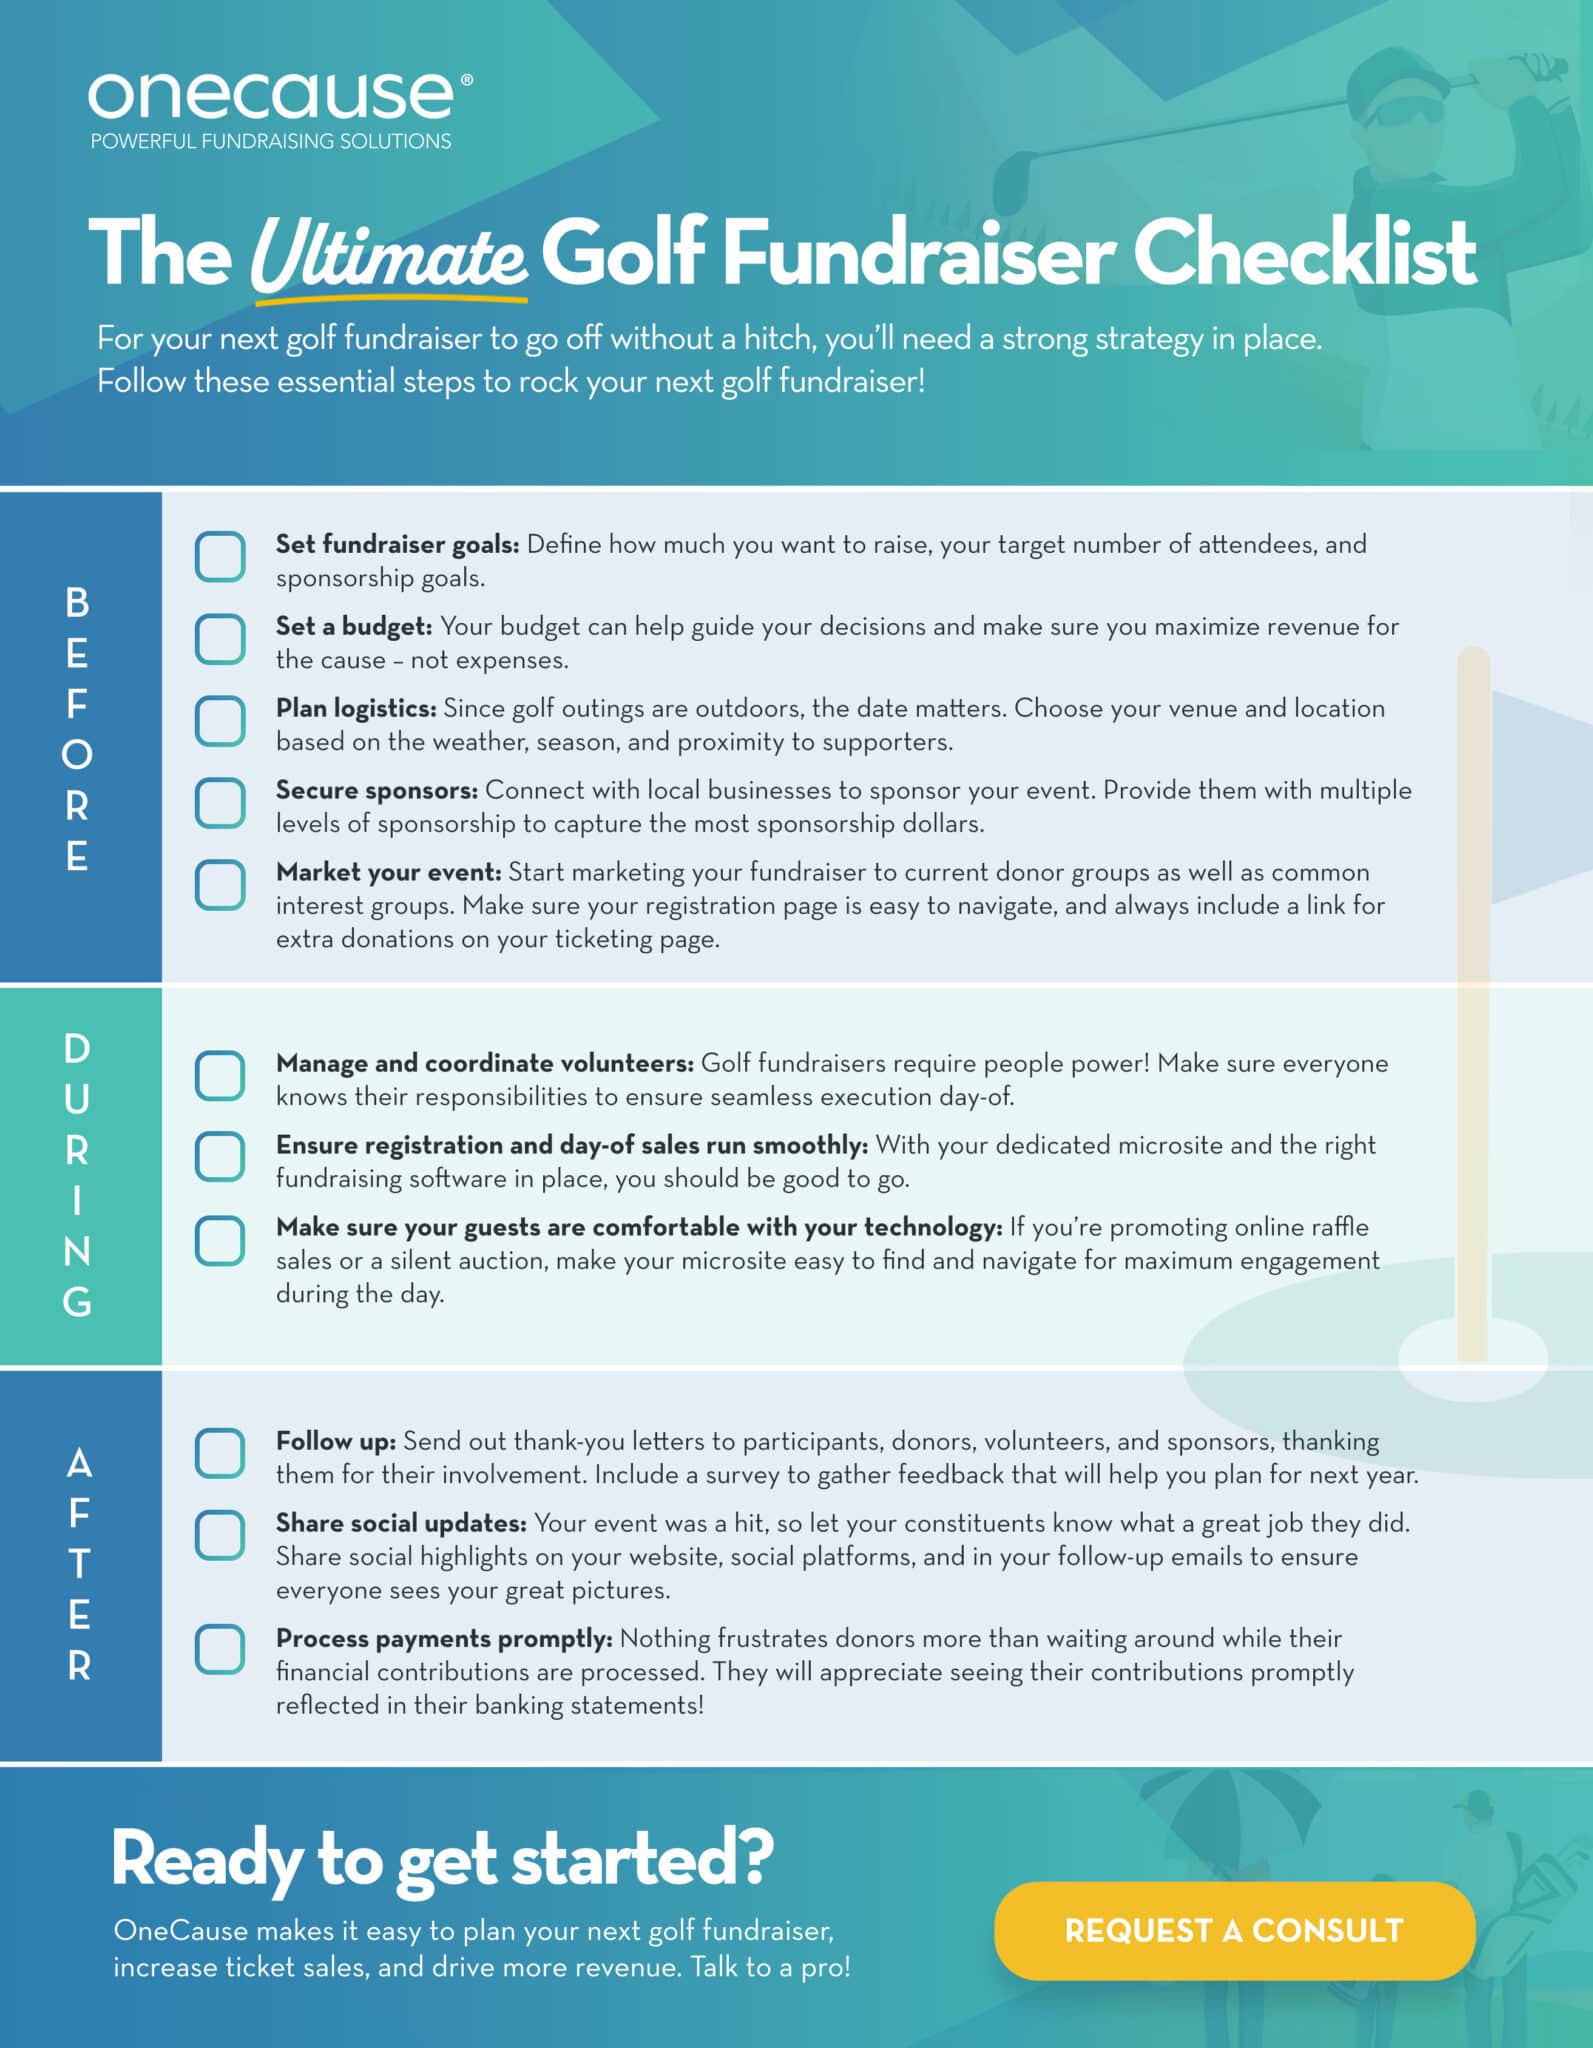 How to Raise Money With a Charity Golf Tournament (+ Free Checklist)